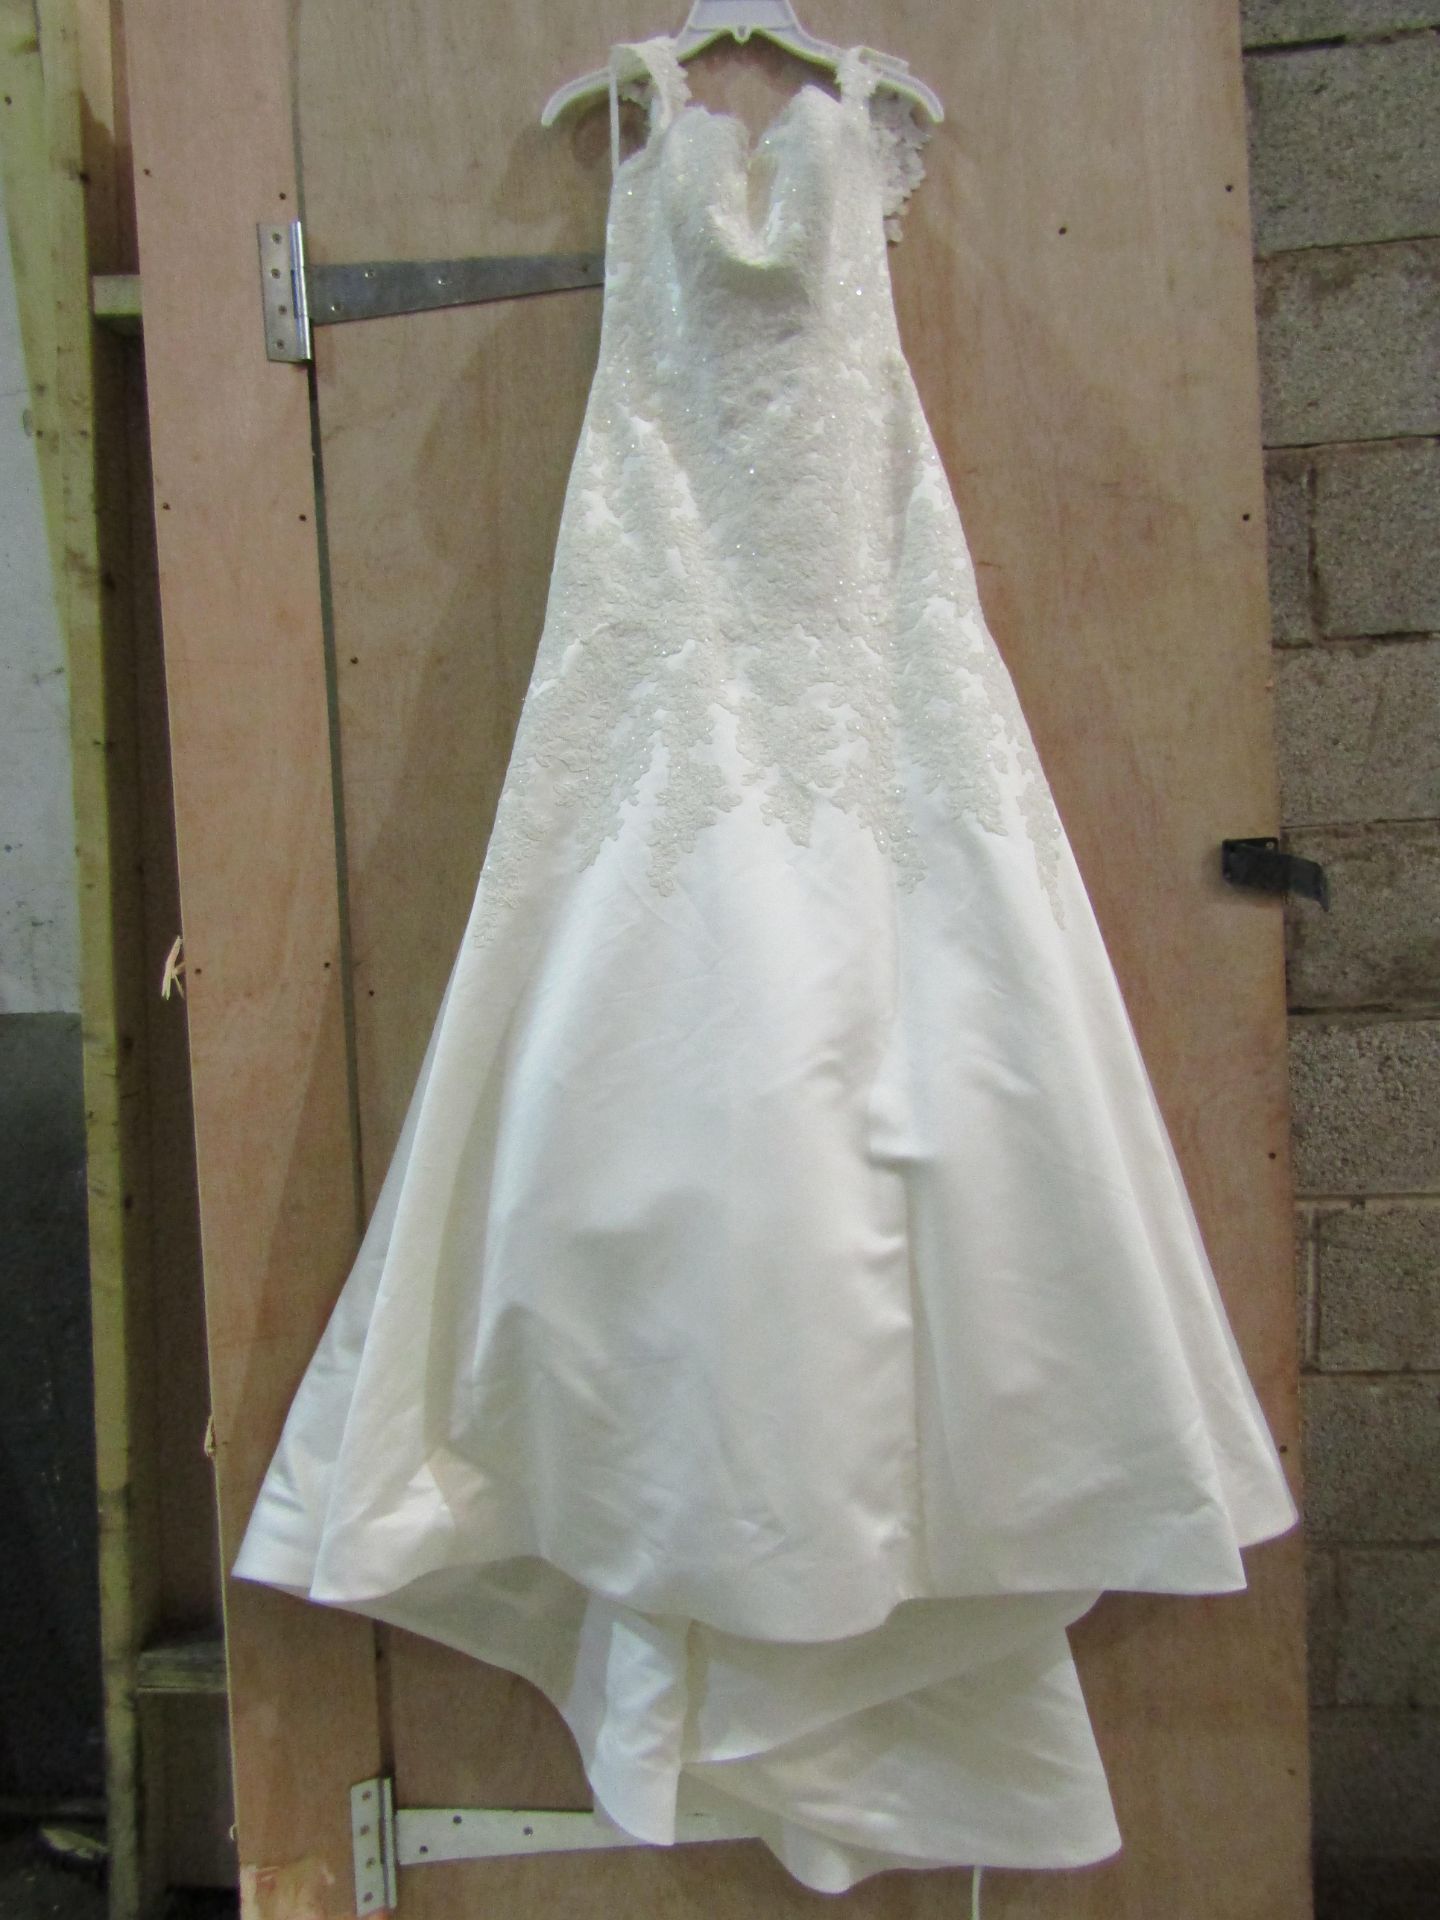 Approx 500 pieces of wedding shop stock to include wedding dresses, mother of the bride, dresses, - Image 62 of 71